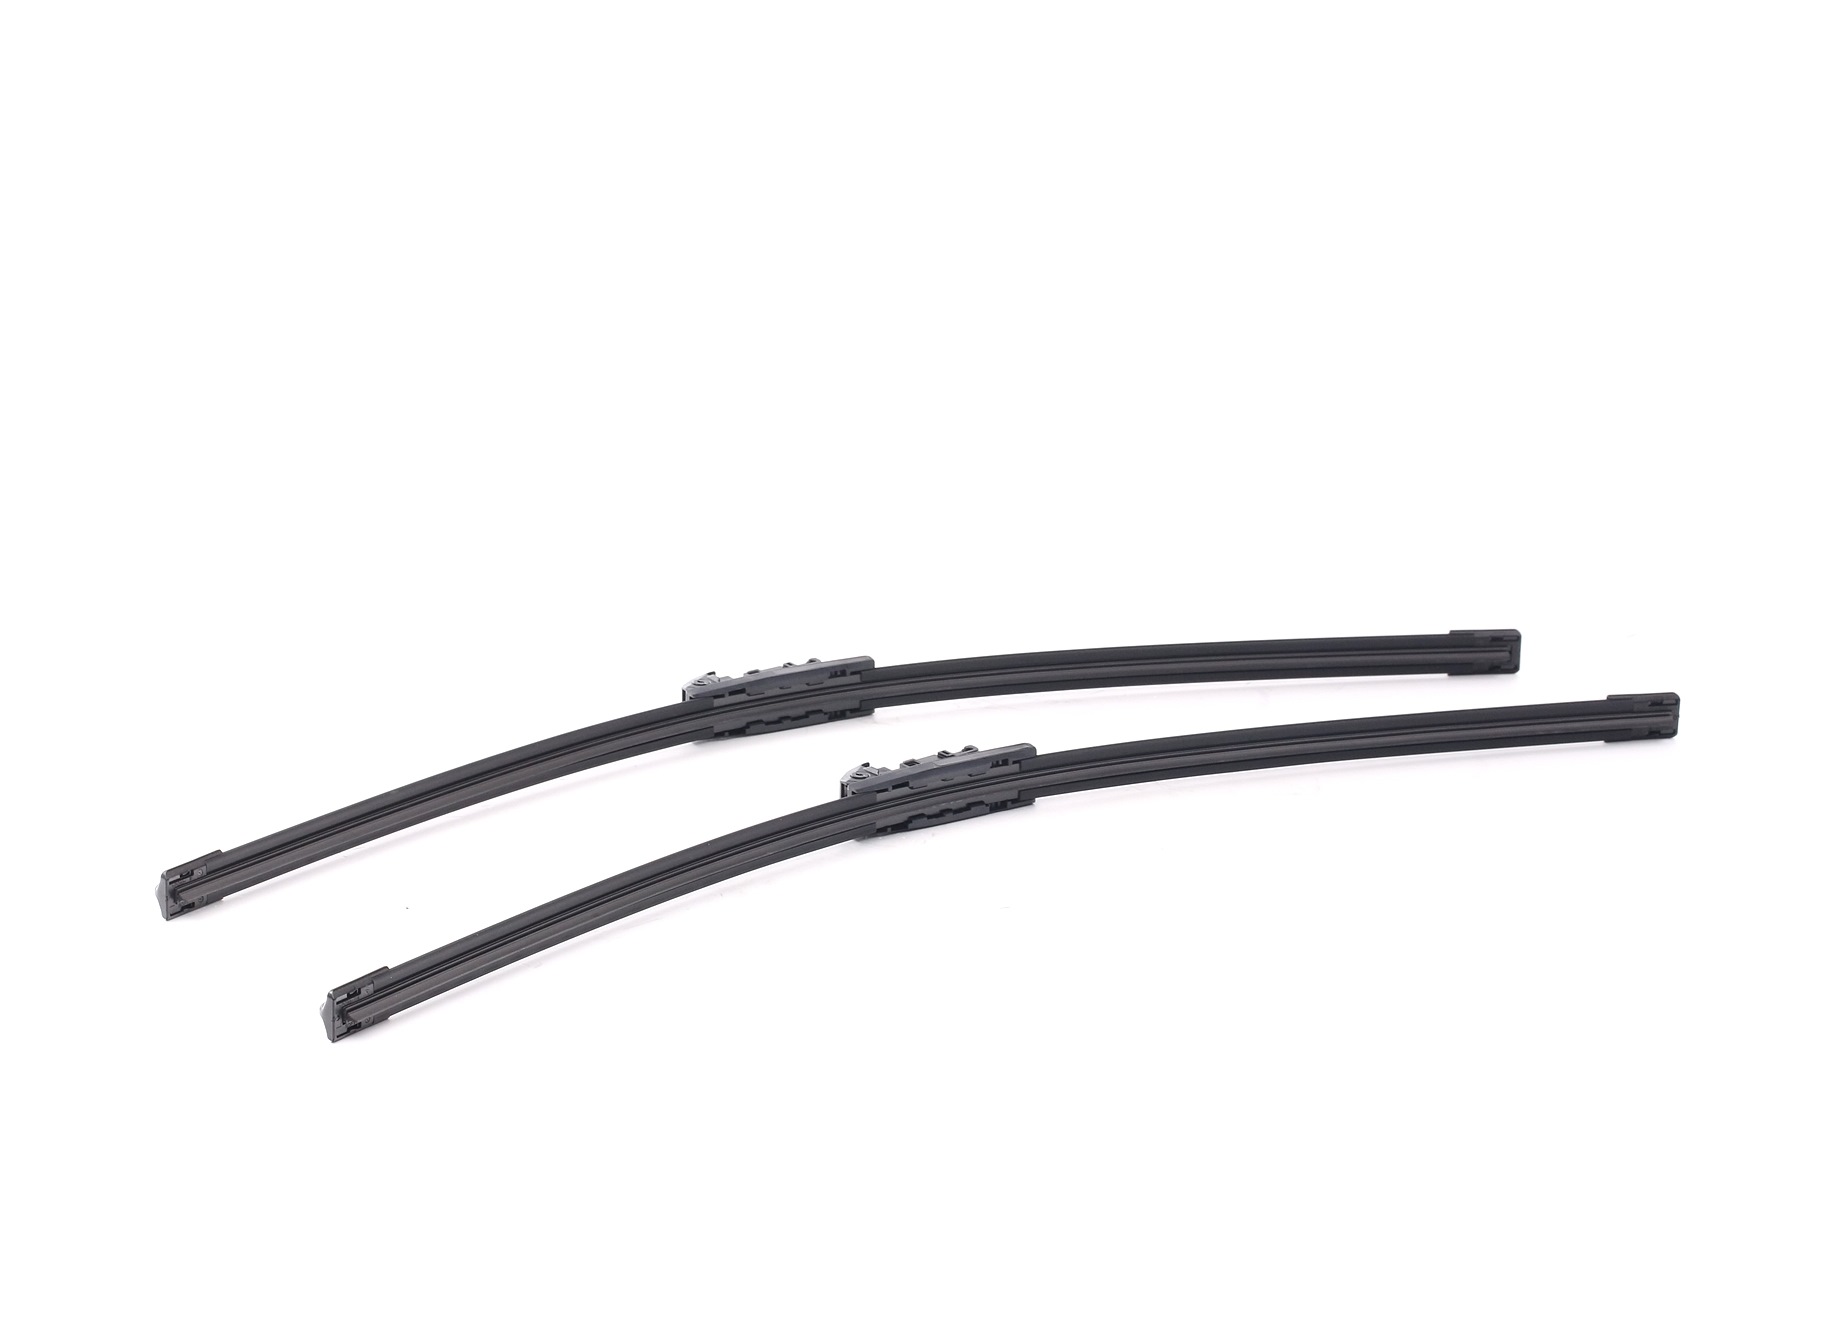 SKWIB-0940361 STARK Windscreen wipers IVECO 630 mm, Beam, for left-hand drive vehicles, 25 Inch